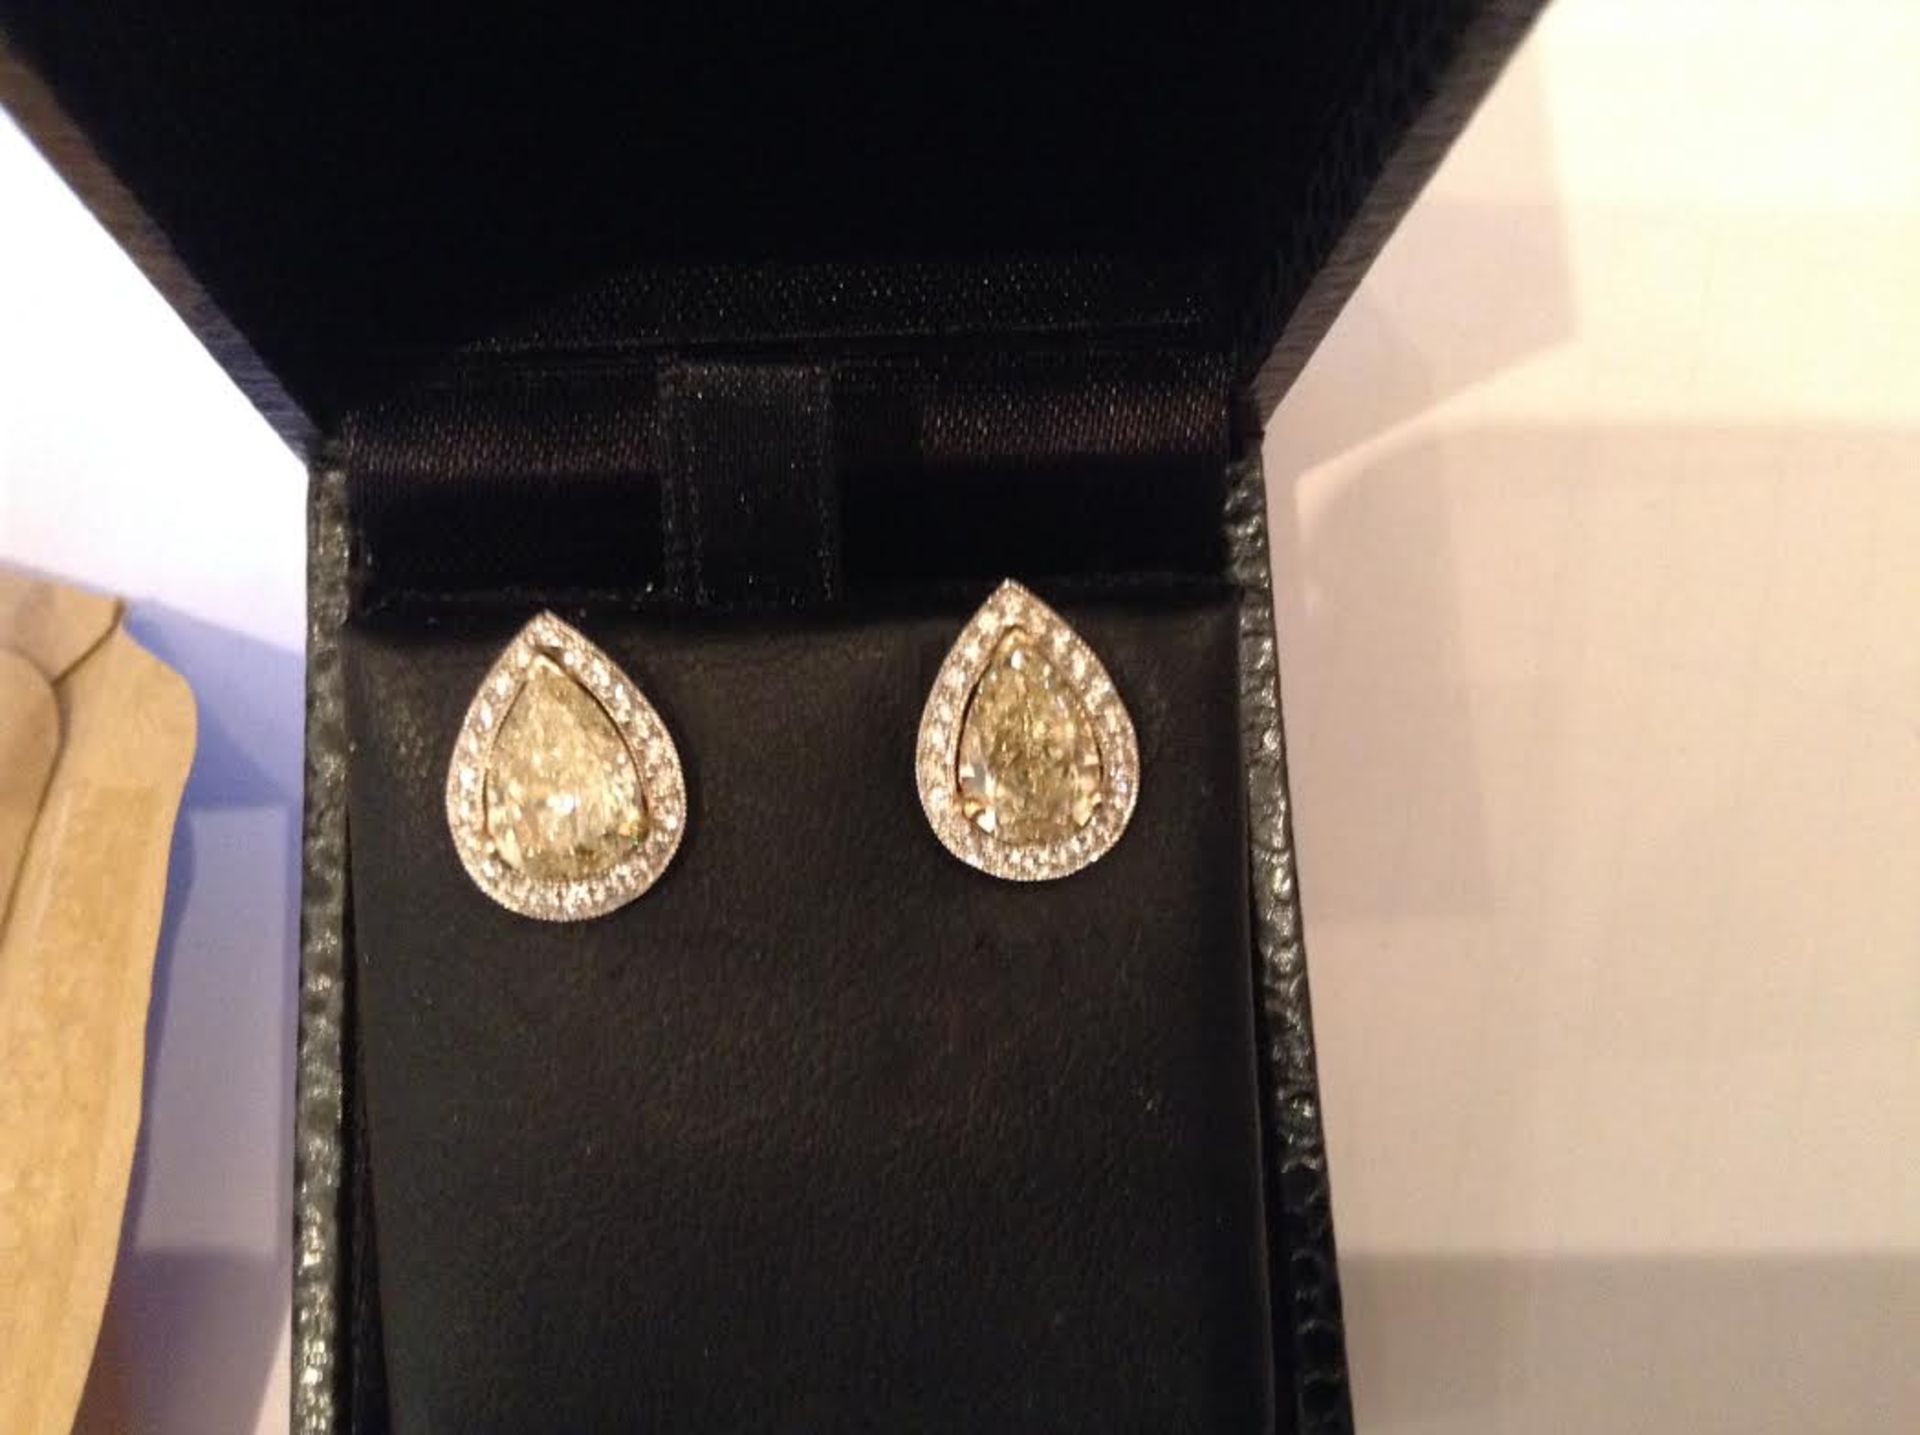 Tiffany style diamond stud earrings each set with a fancy yellow pear shaped diamond weighing 1.00ct